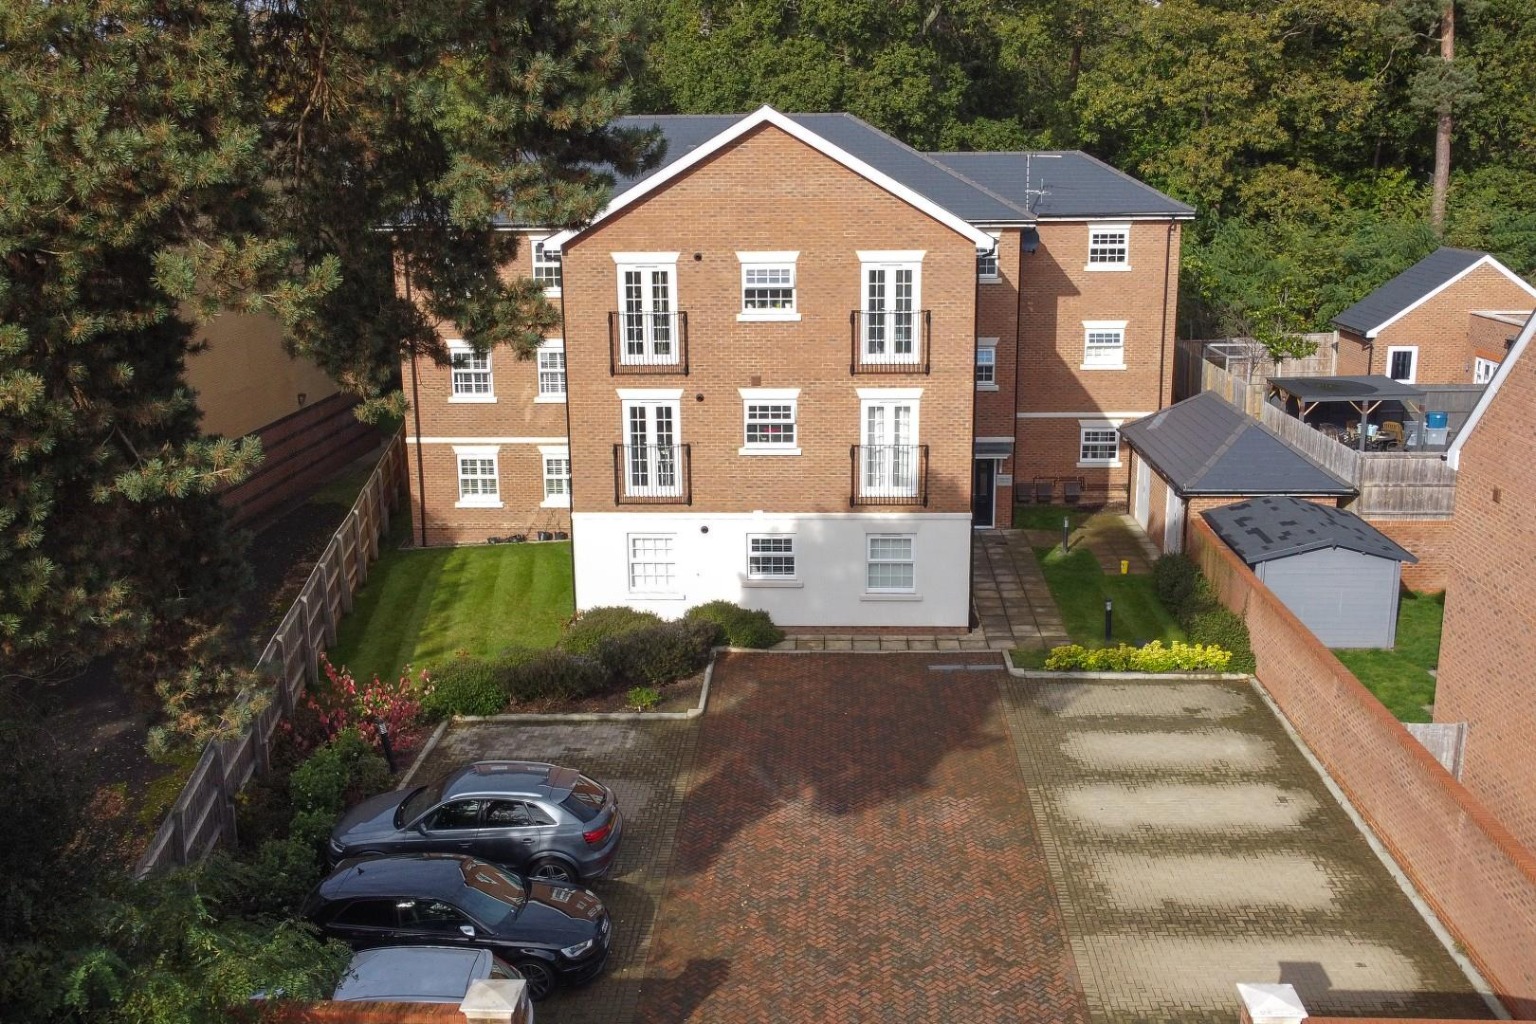 *MARKETED BY CHRIS GRAY* This stunning luxury ground floor, two double bedroom, two bathroom apartment is within just a few minutes walk of Camberley town centre and train station!  There is a large open-plan kitchen/dining/living room and luxury bathroom and en-suite.